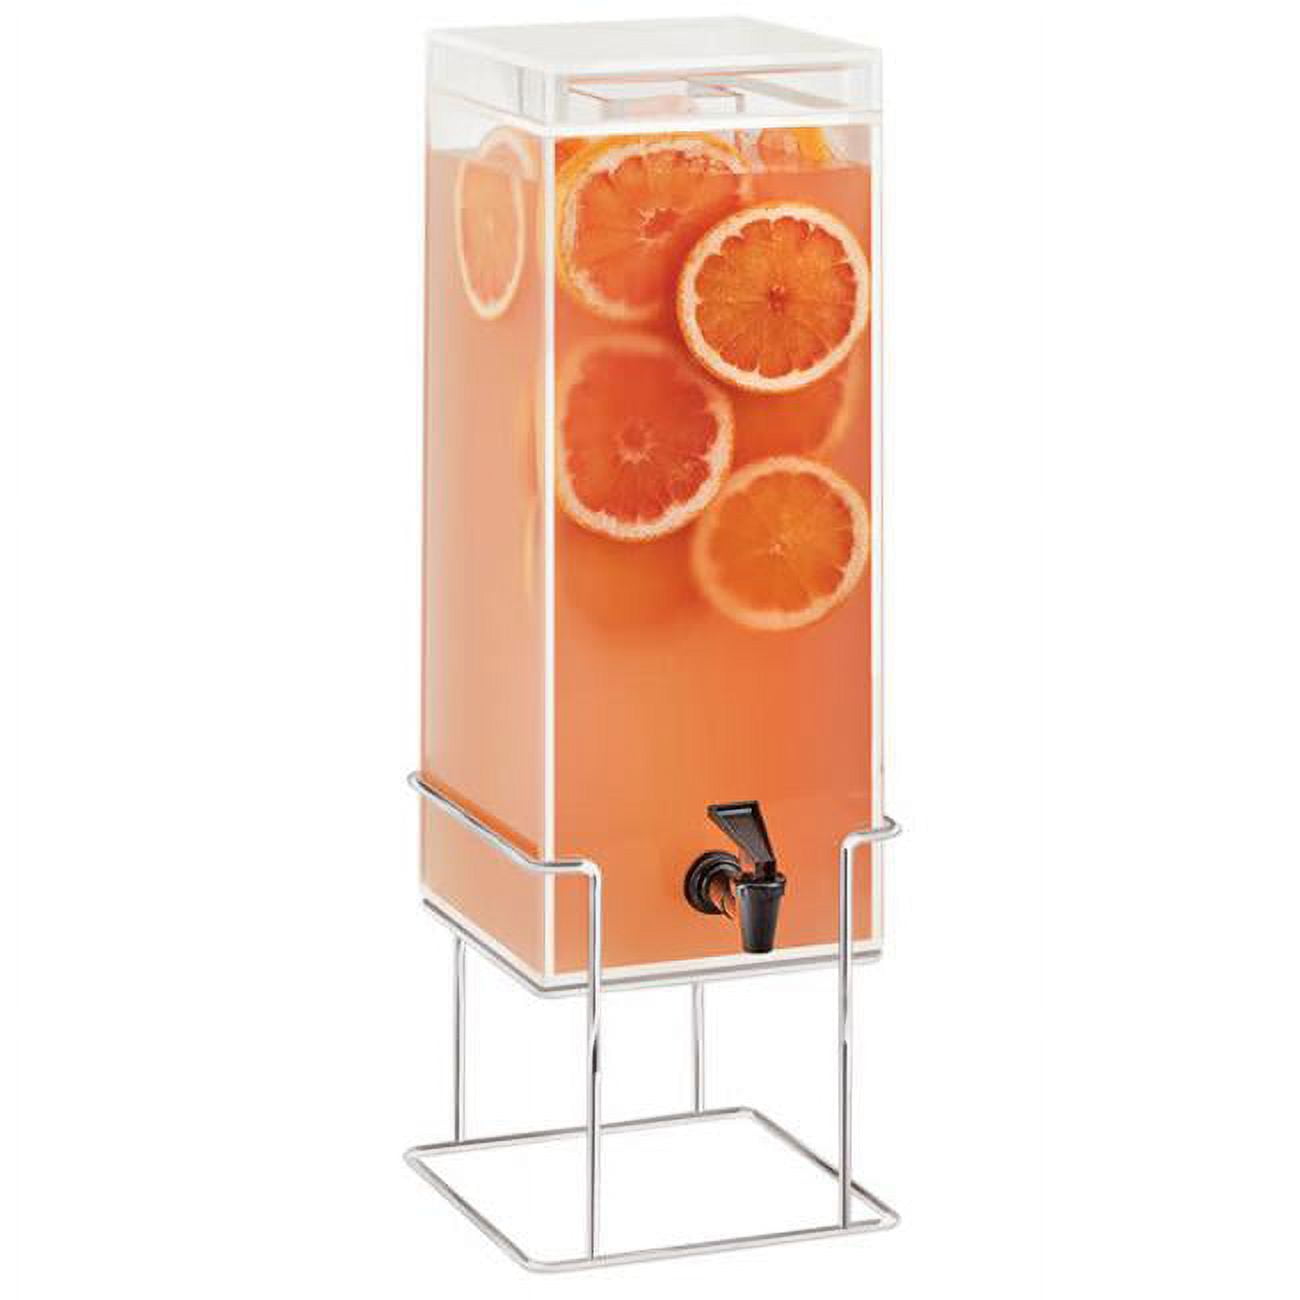 22002-3-49 3 Gal Square Beverage Dispenser With Ice Chamber - Metal Base, Chrome - 8.125 X 9.75 X 25.75 In.